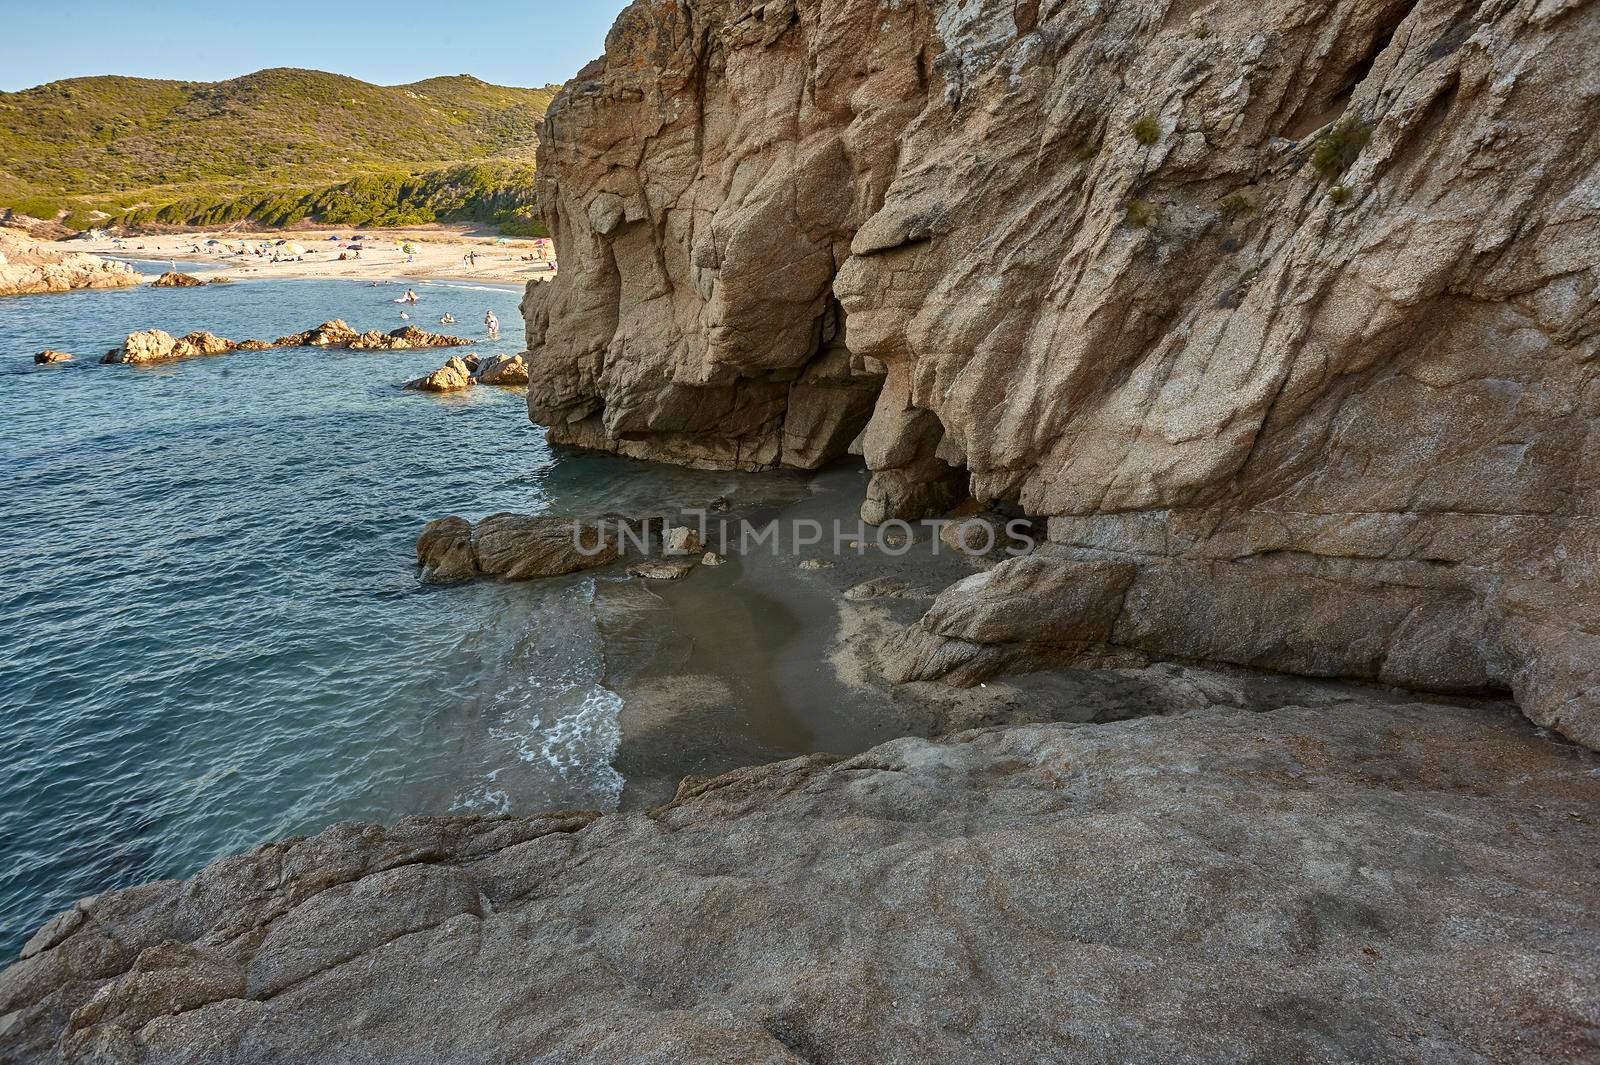 Natural cave carved on a rocky wall in the southern coast of Sardinia: Cala Sa Figu beach.